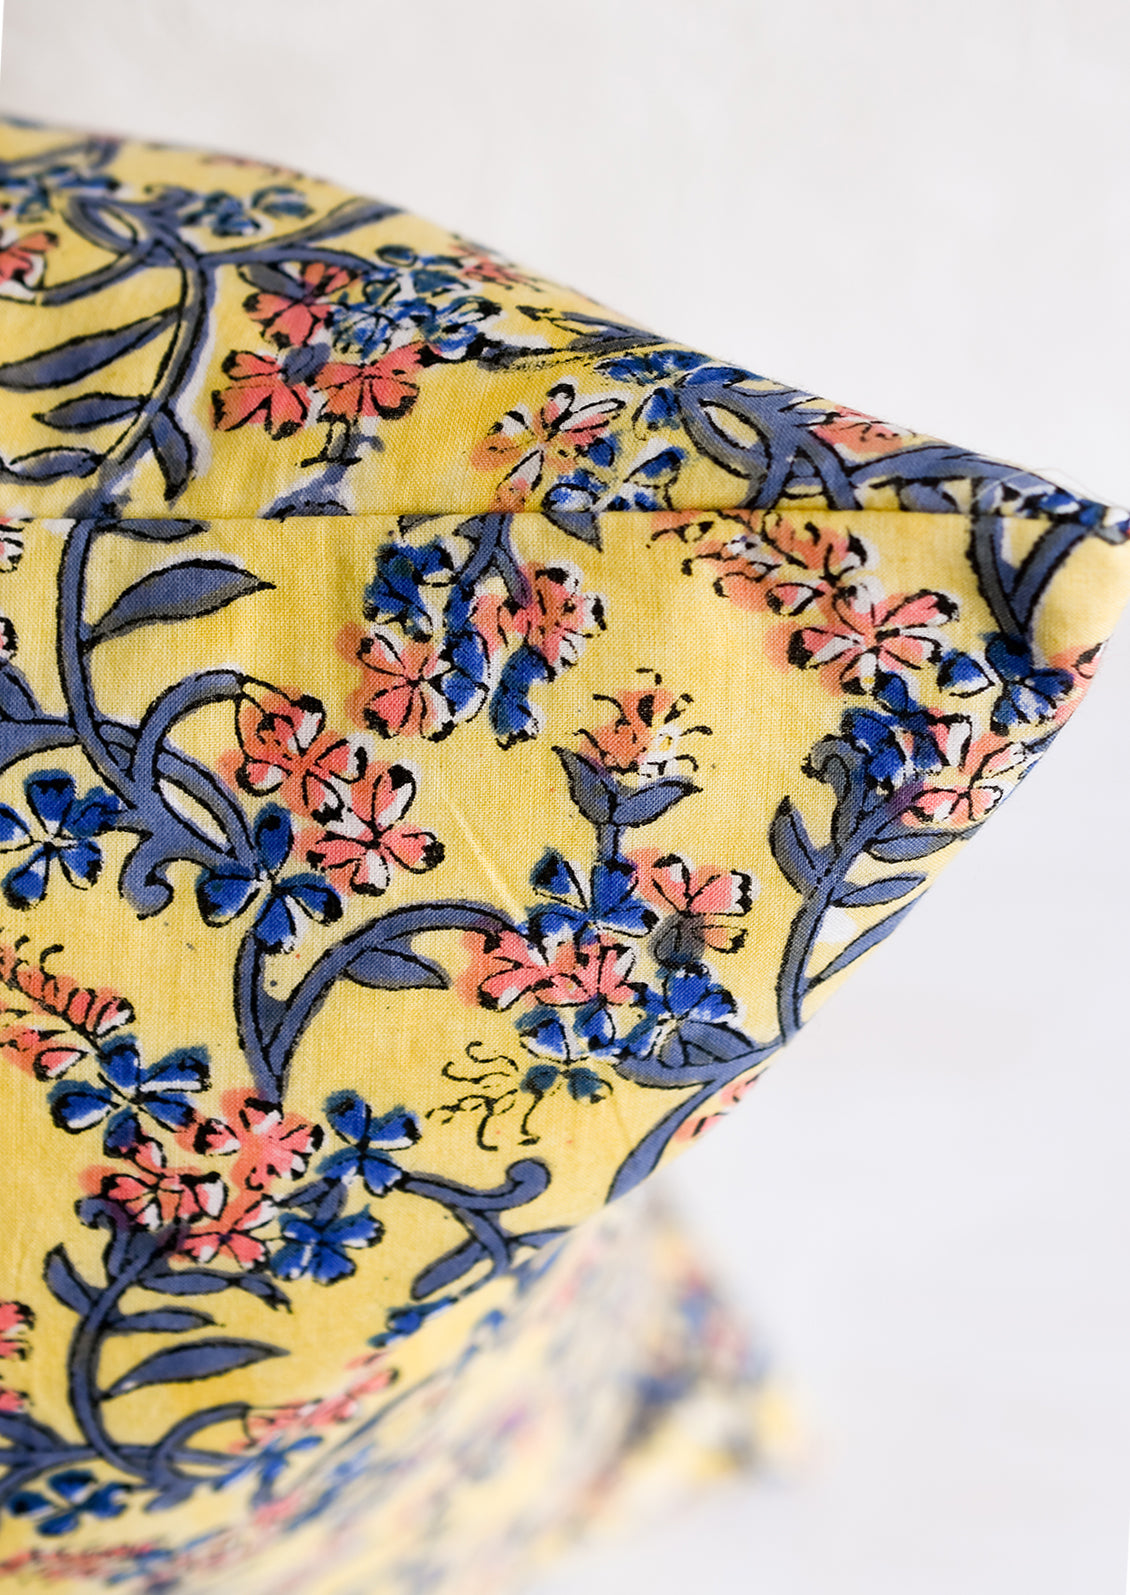 A block printed throw pillow in yellow with blue and pink floral print.